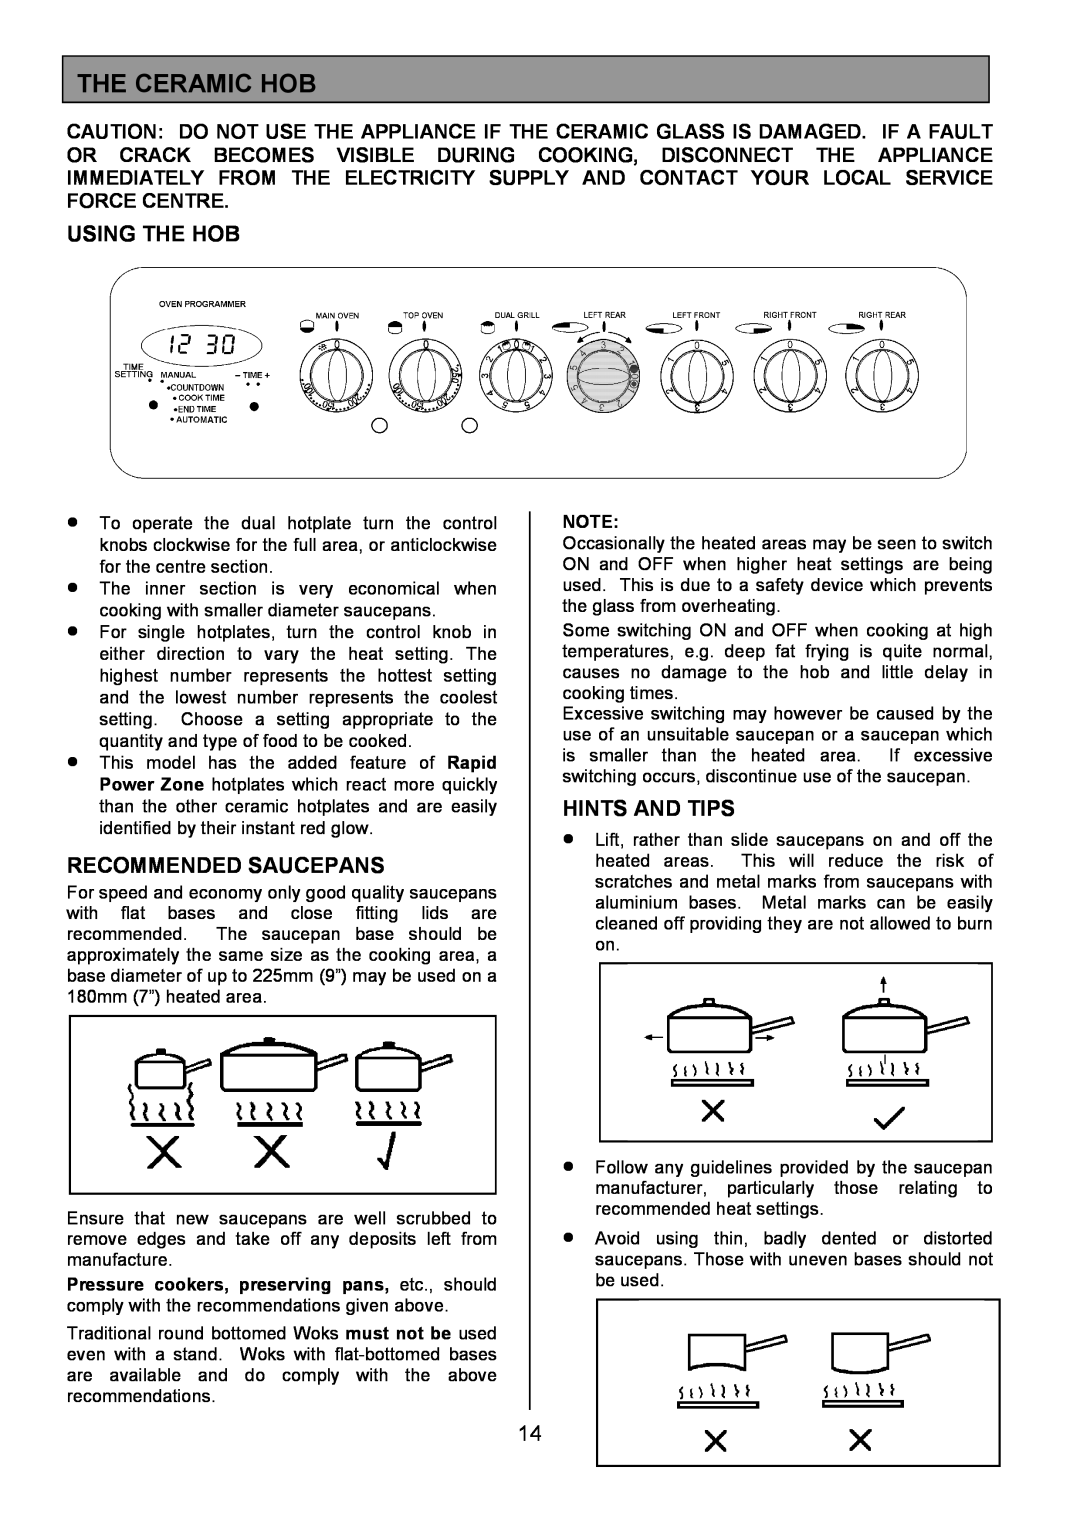 Tricity Bendix SIE531 installation instructions The Ceramic Hob, Using The Hob, Recommended Saucepans, Hints And Tips 